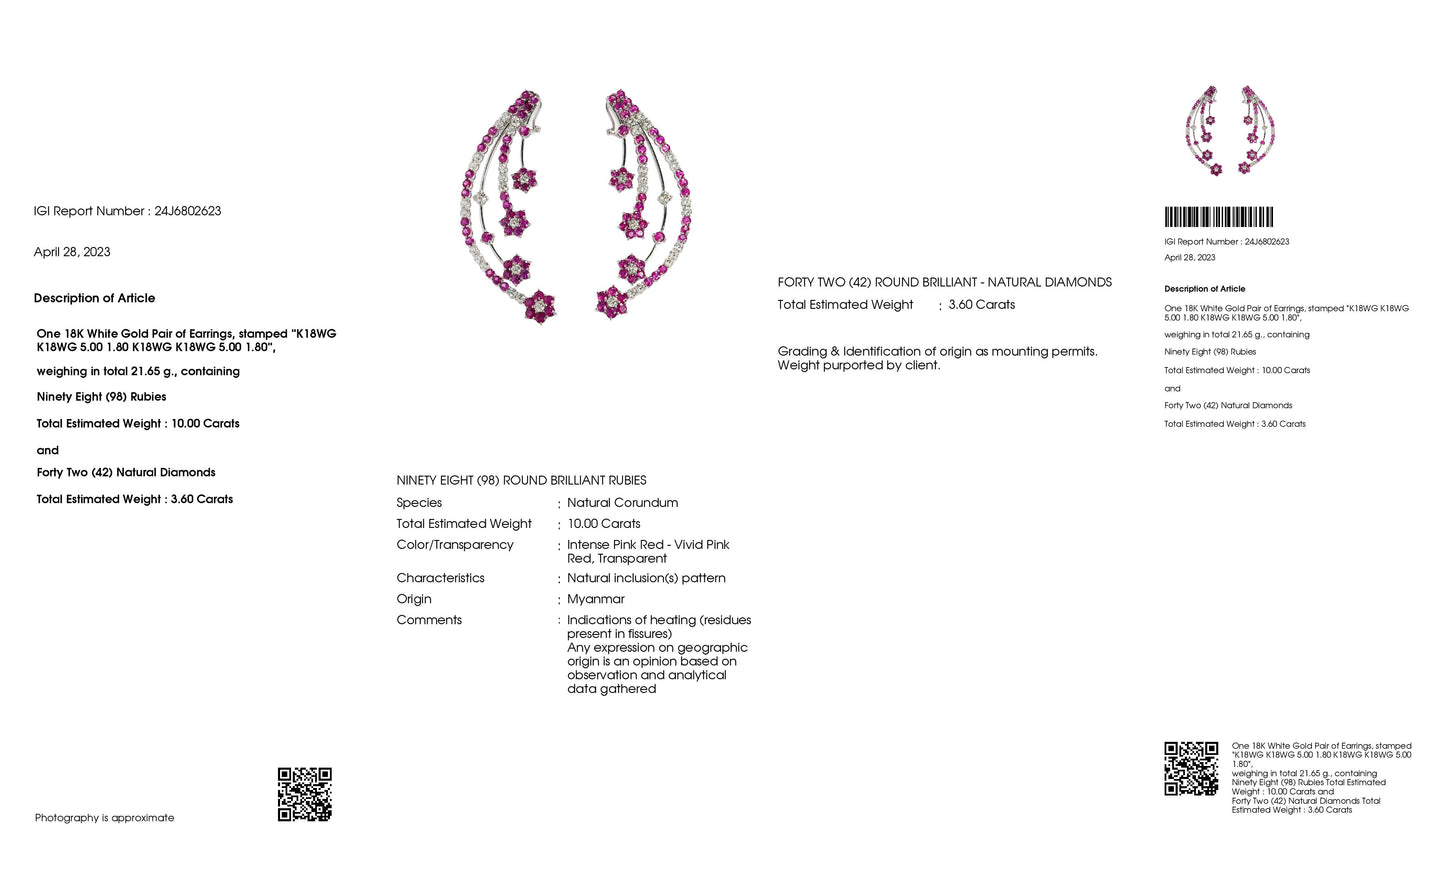 10.00ct NATURAL BURMA RUBIES and 3.60ct NATURAL DIAMONDS set with 18K White Gold Pair of Earrings